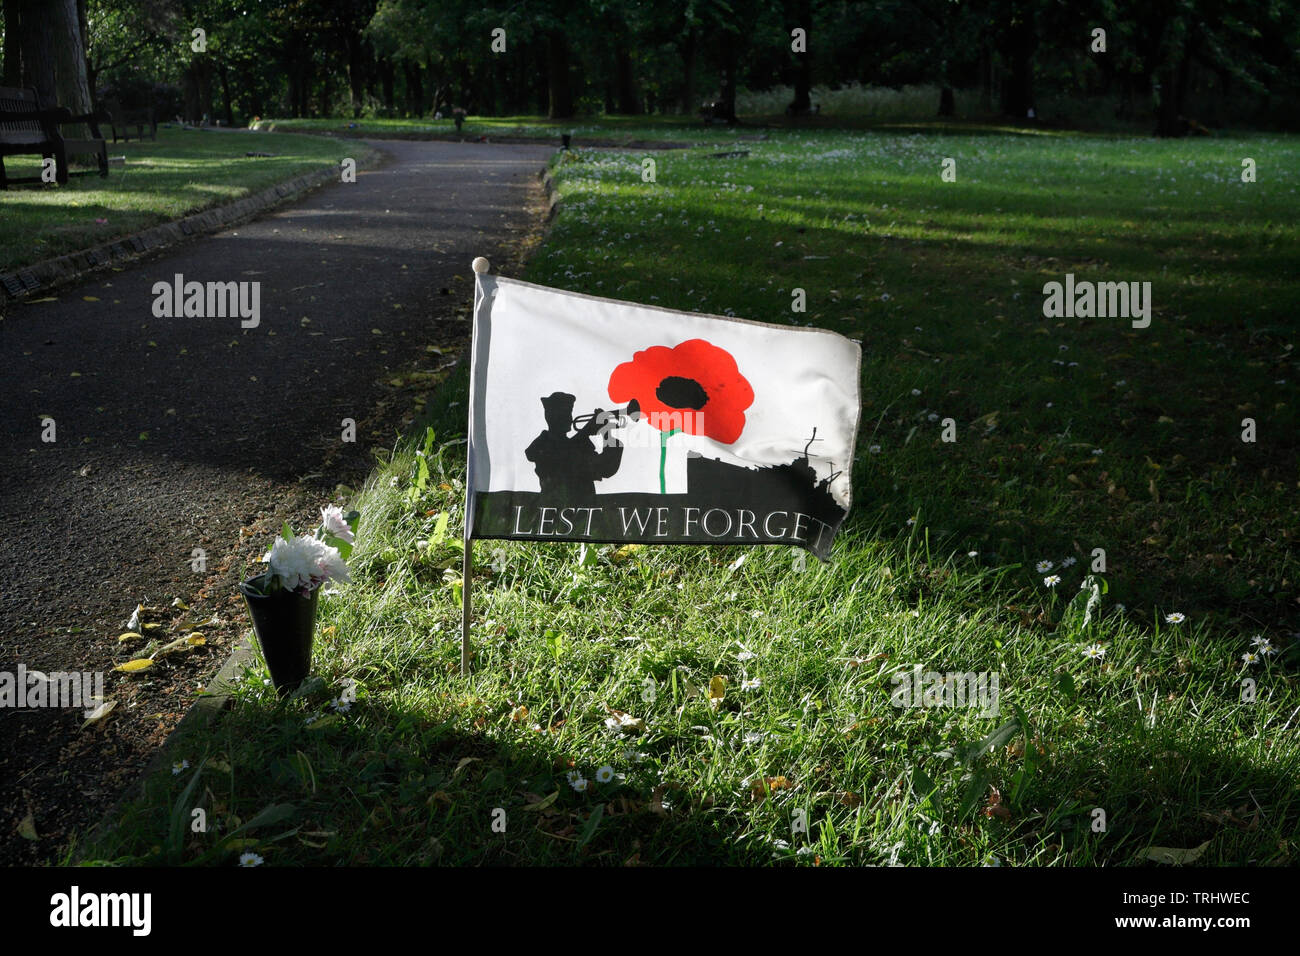 Lest we forget flag,ww1 poppy flag,  garden of remembrance in the UK Stock Photo